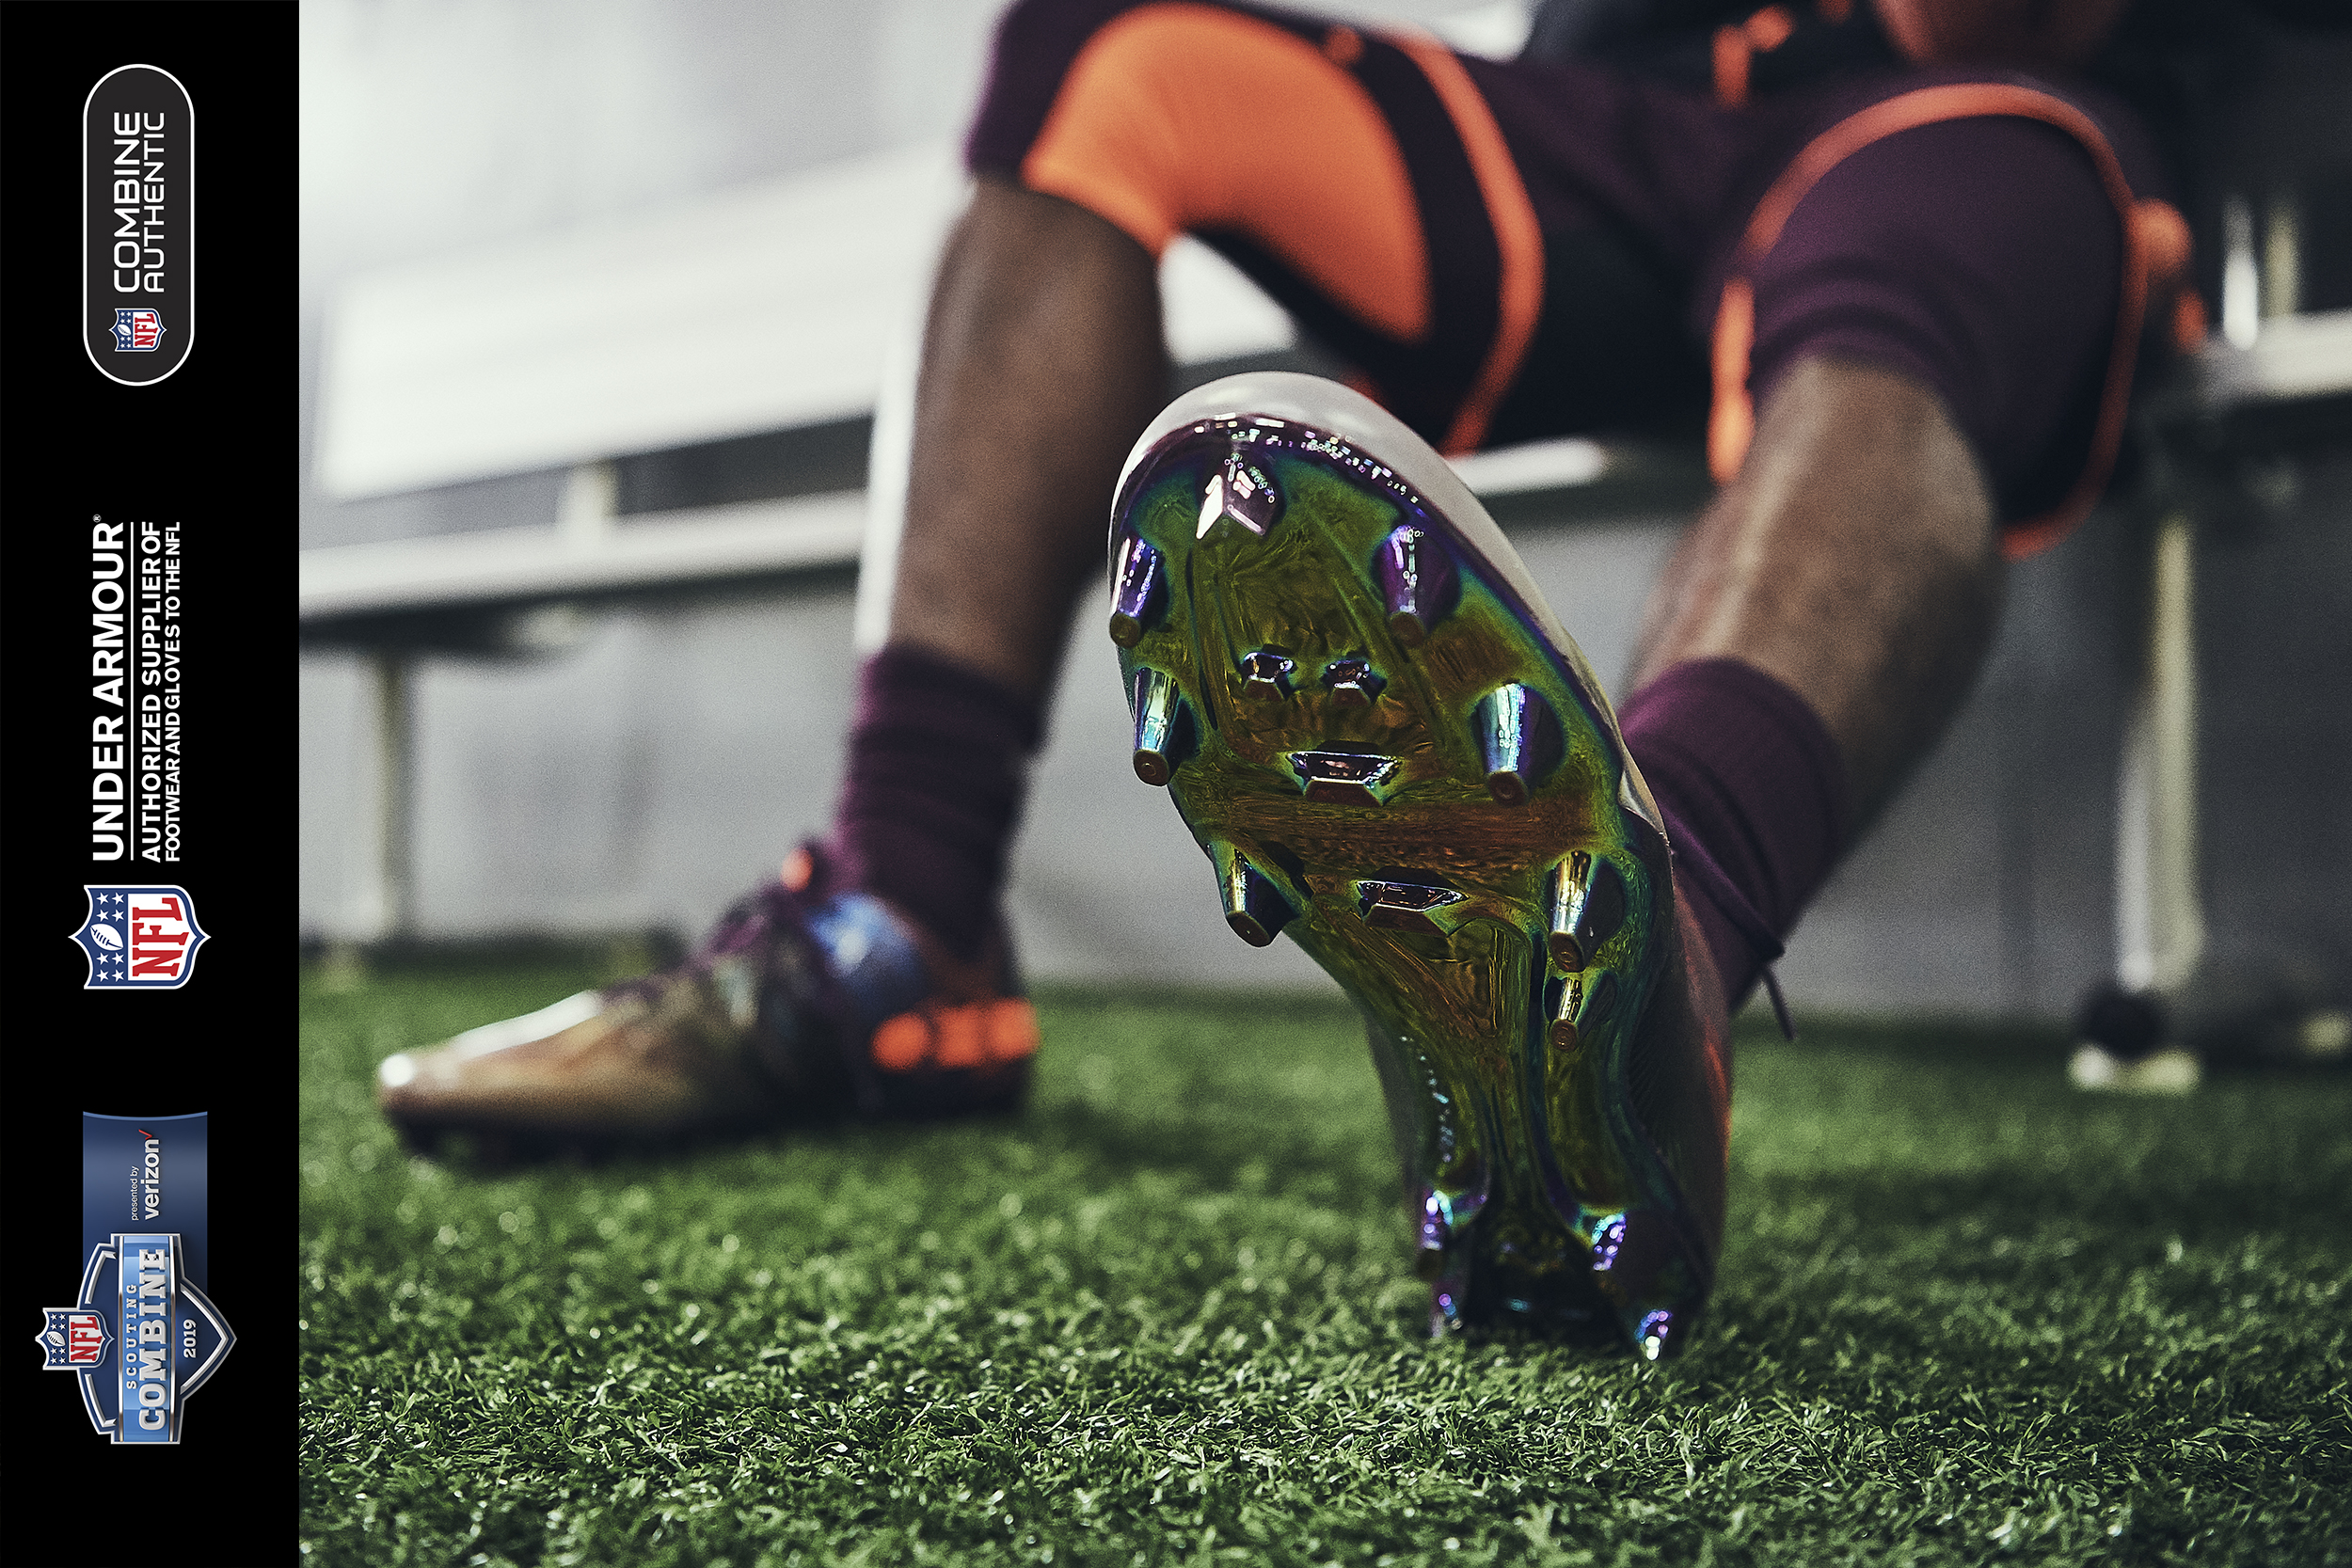 under armour nfl cleats